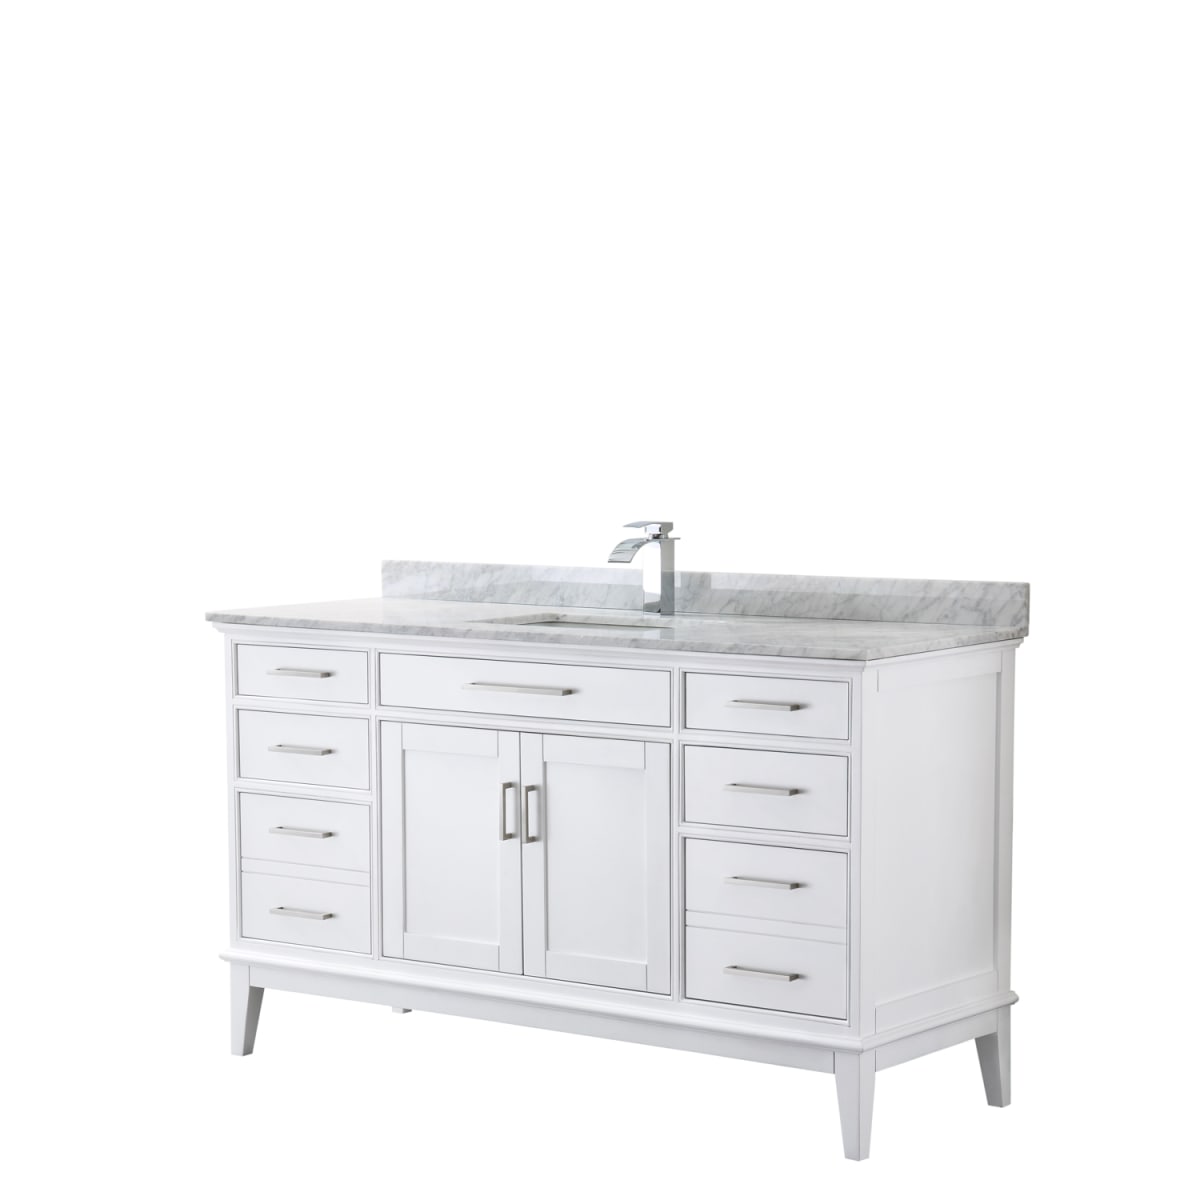 Wood Cabinet And Marble Vanity Top, Wyndham Collection Berkeley White 60 Inch Double Vanity